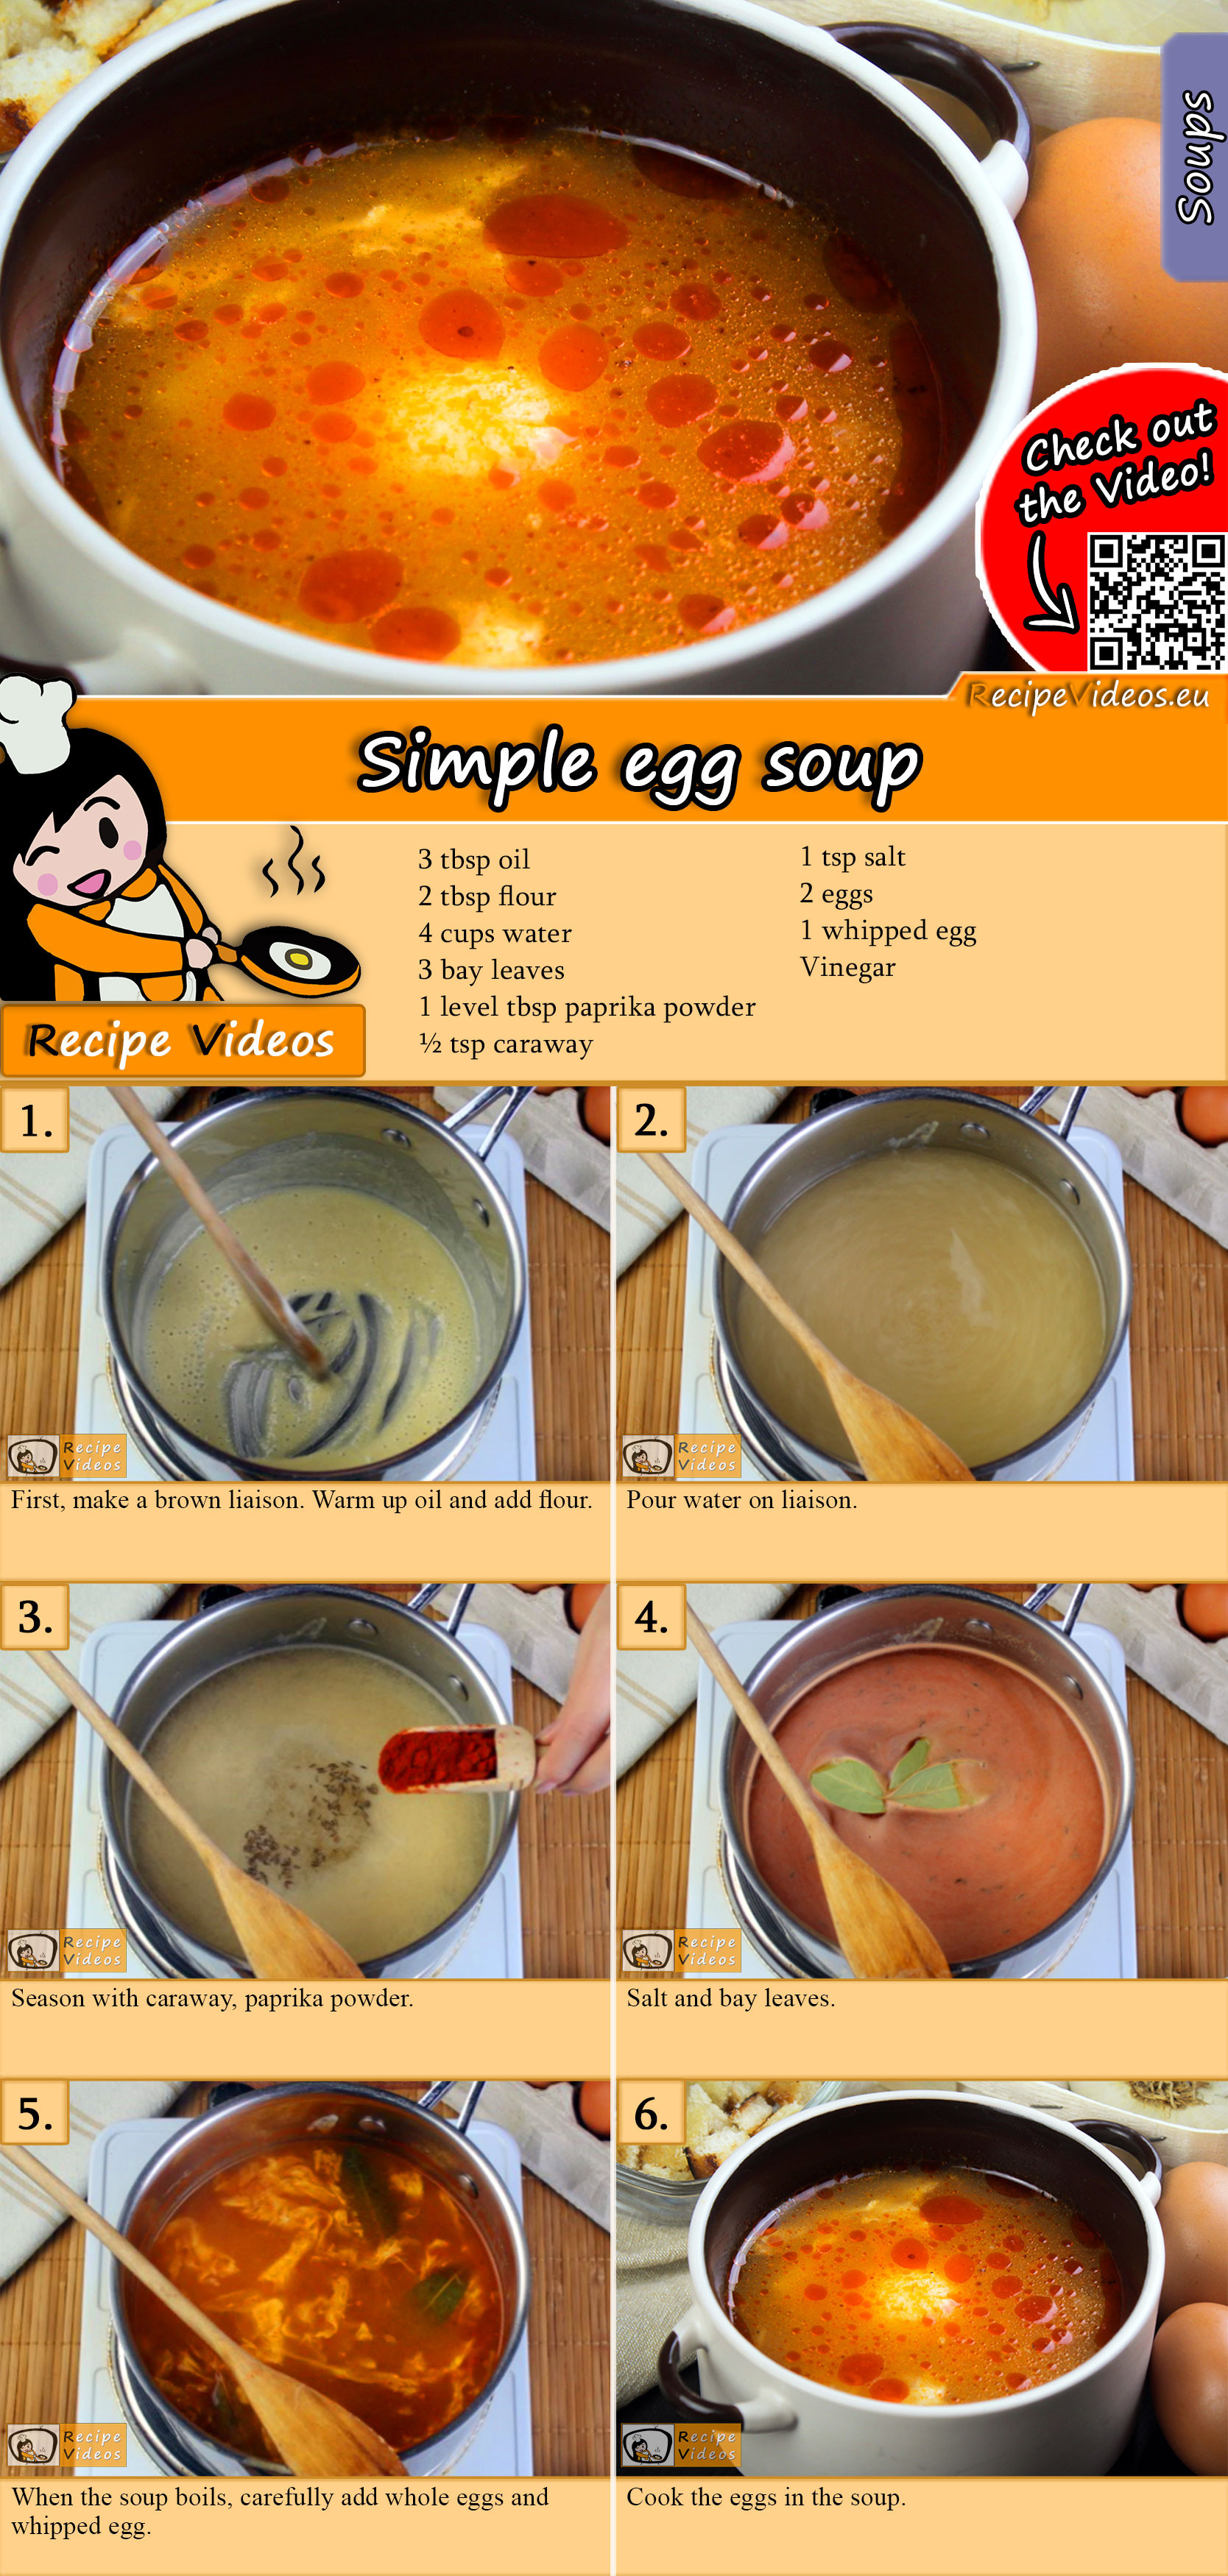 Simple egg soup recipe with video